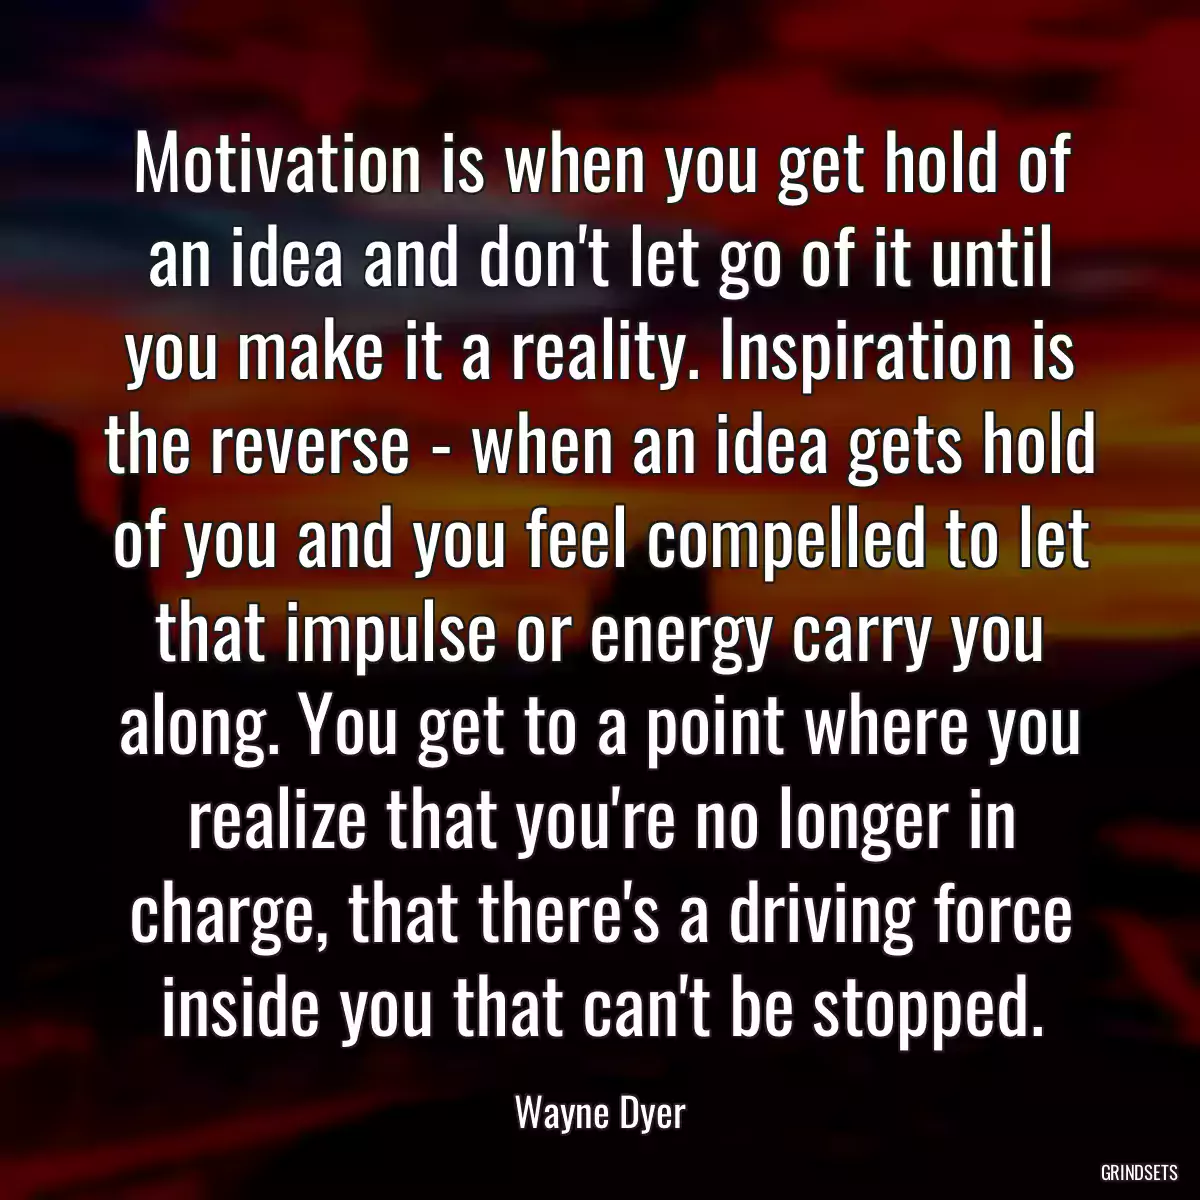 Motivation is when you get hold of an idea and don\'t let go of it until you make it a reality. Inspiration is the reverse - when an idea gets hold of you and you feel compelled to let that impulse or energy carry you along. You get to a point where you realize that you\'re no longer in charge, that there\'s a driving force inside you that can\'t be stopped.